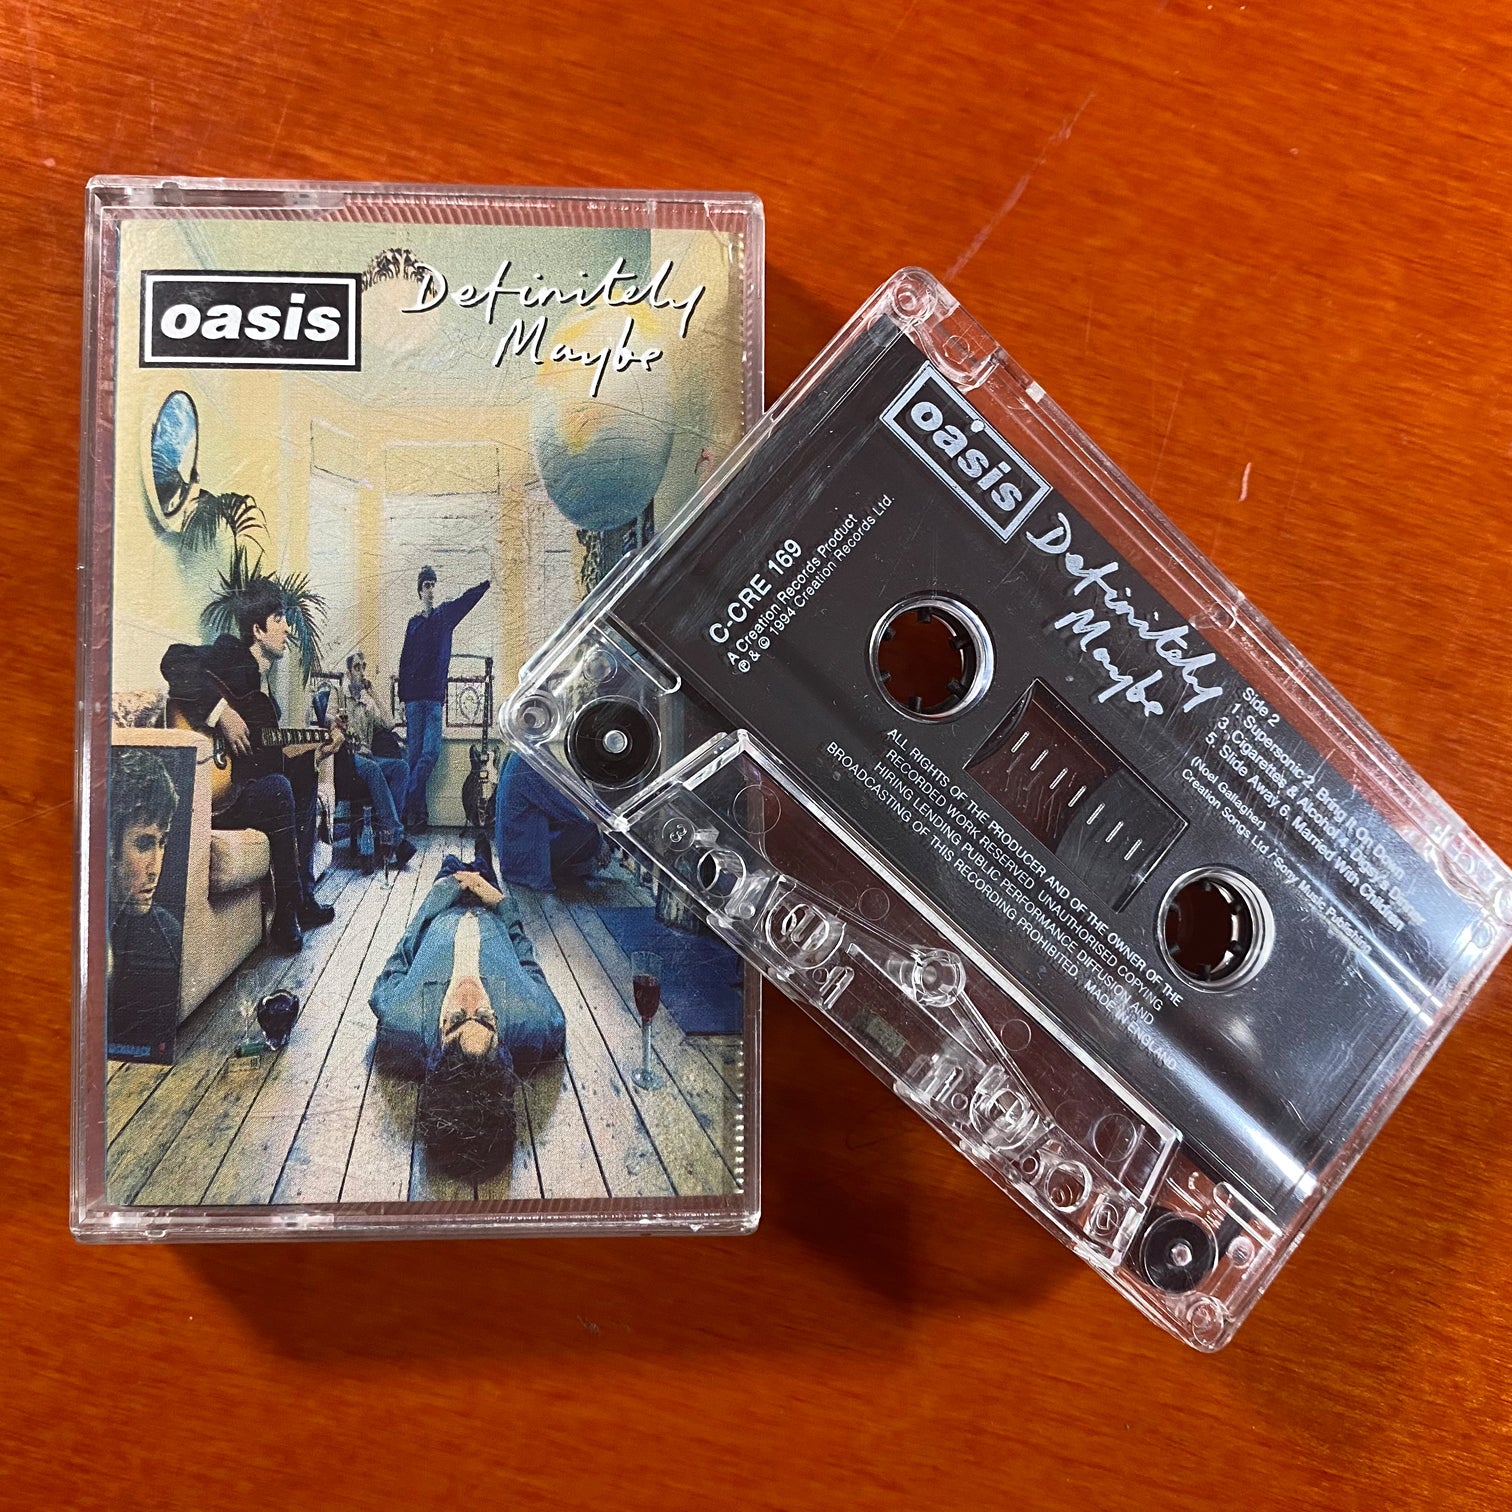 Oasis - Definitely Maybe - Creation Records Cassette - New Item